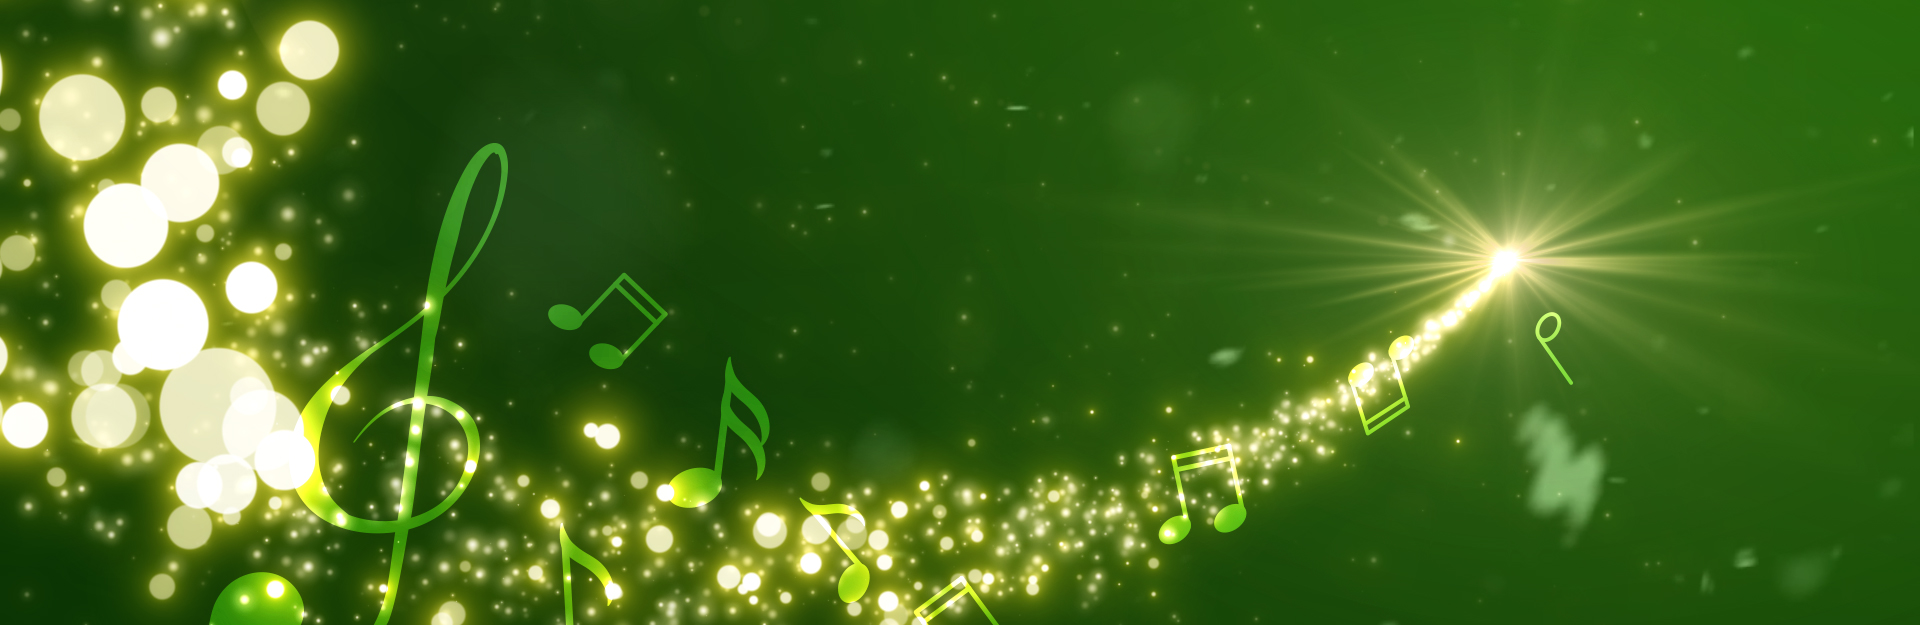 Green music notes dash across a darker green background showing immersive xmas cards with text reading "Make it musical"